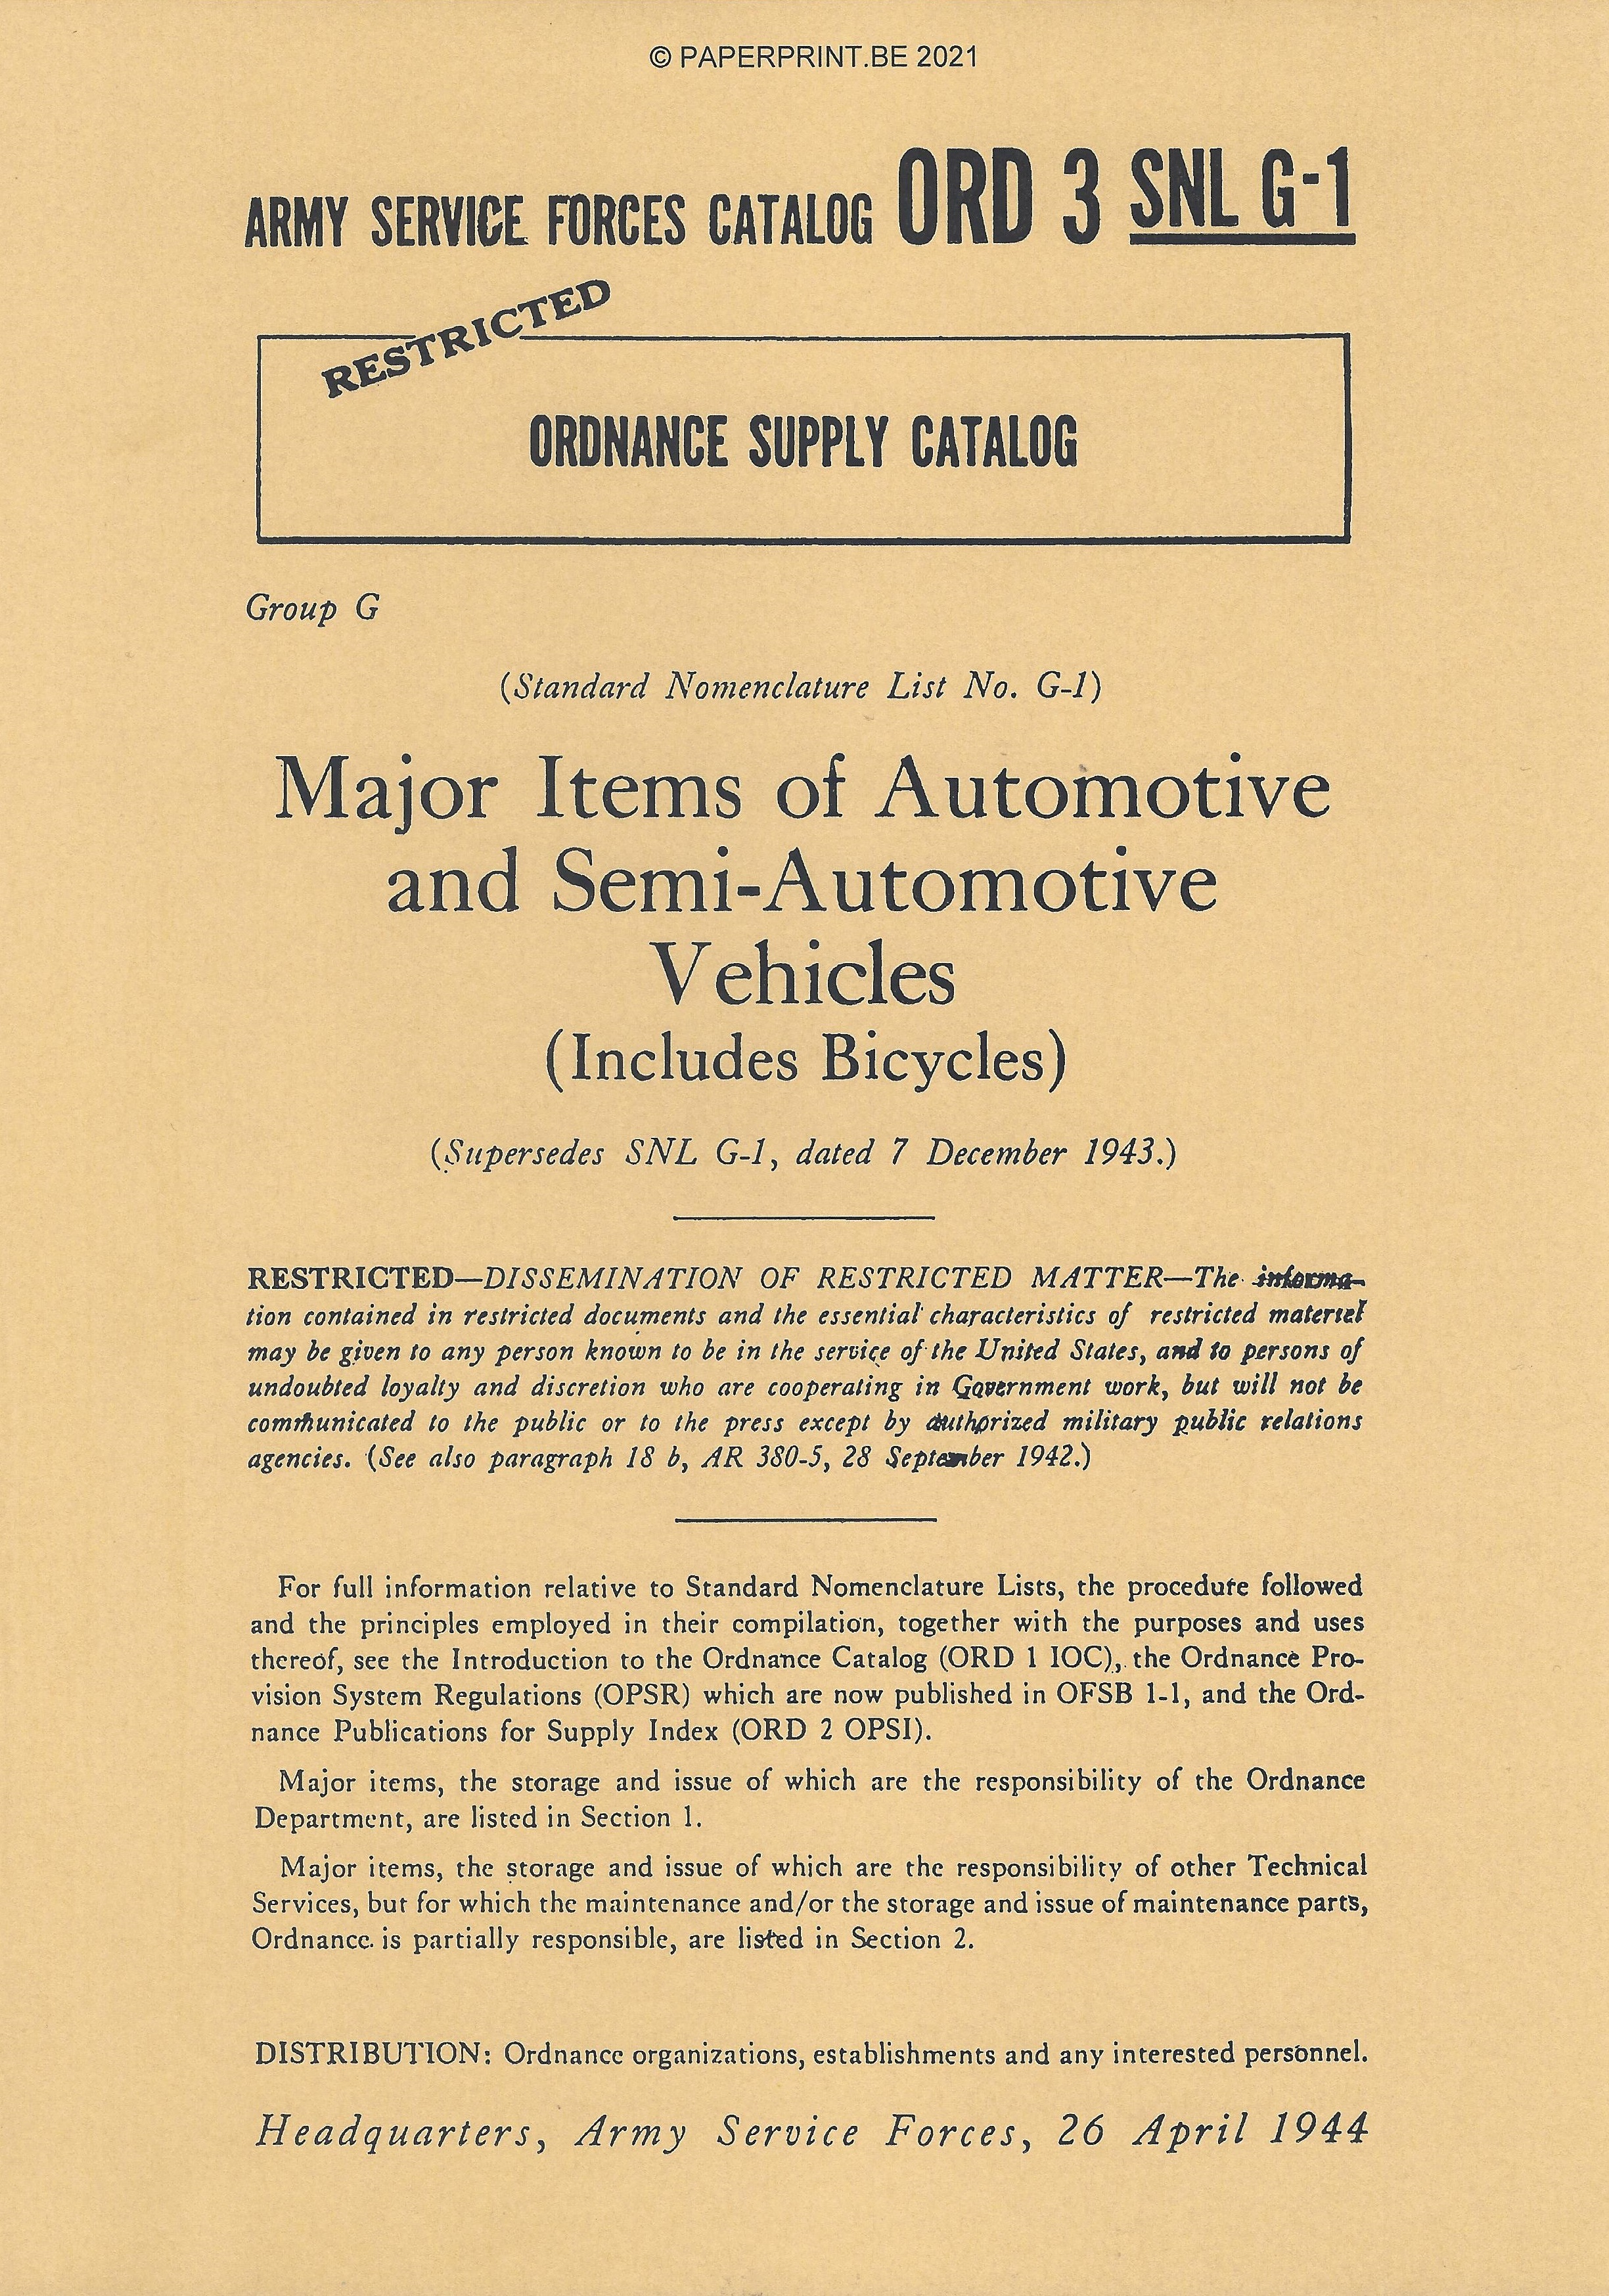 SNL G-1 26 APRIL 1944 US MAJOR ITEMS OF AUTOMOTIVE AND SEMI-AUTOMOTIVE VEHICLES (INCLUDES BICYCLES)